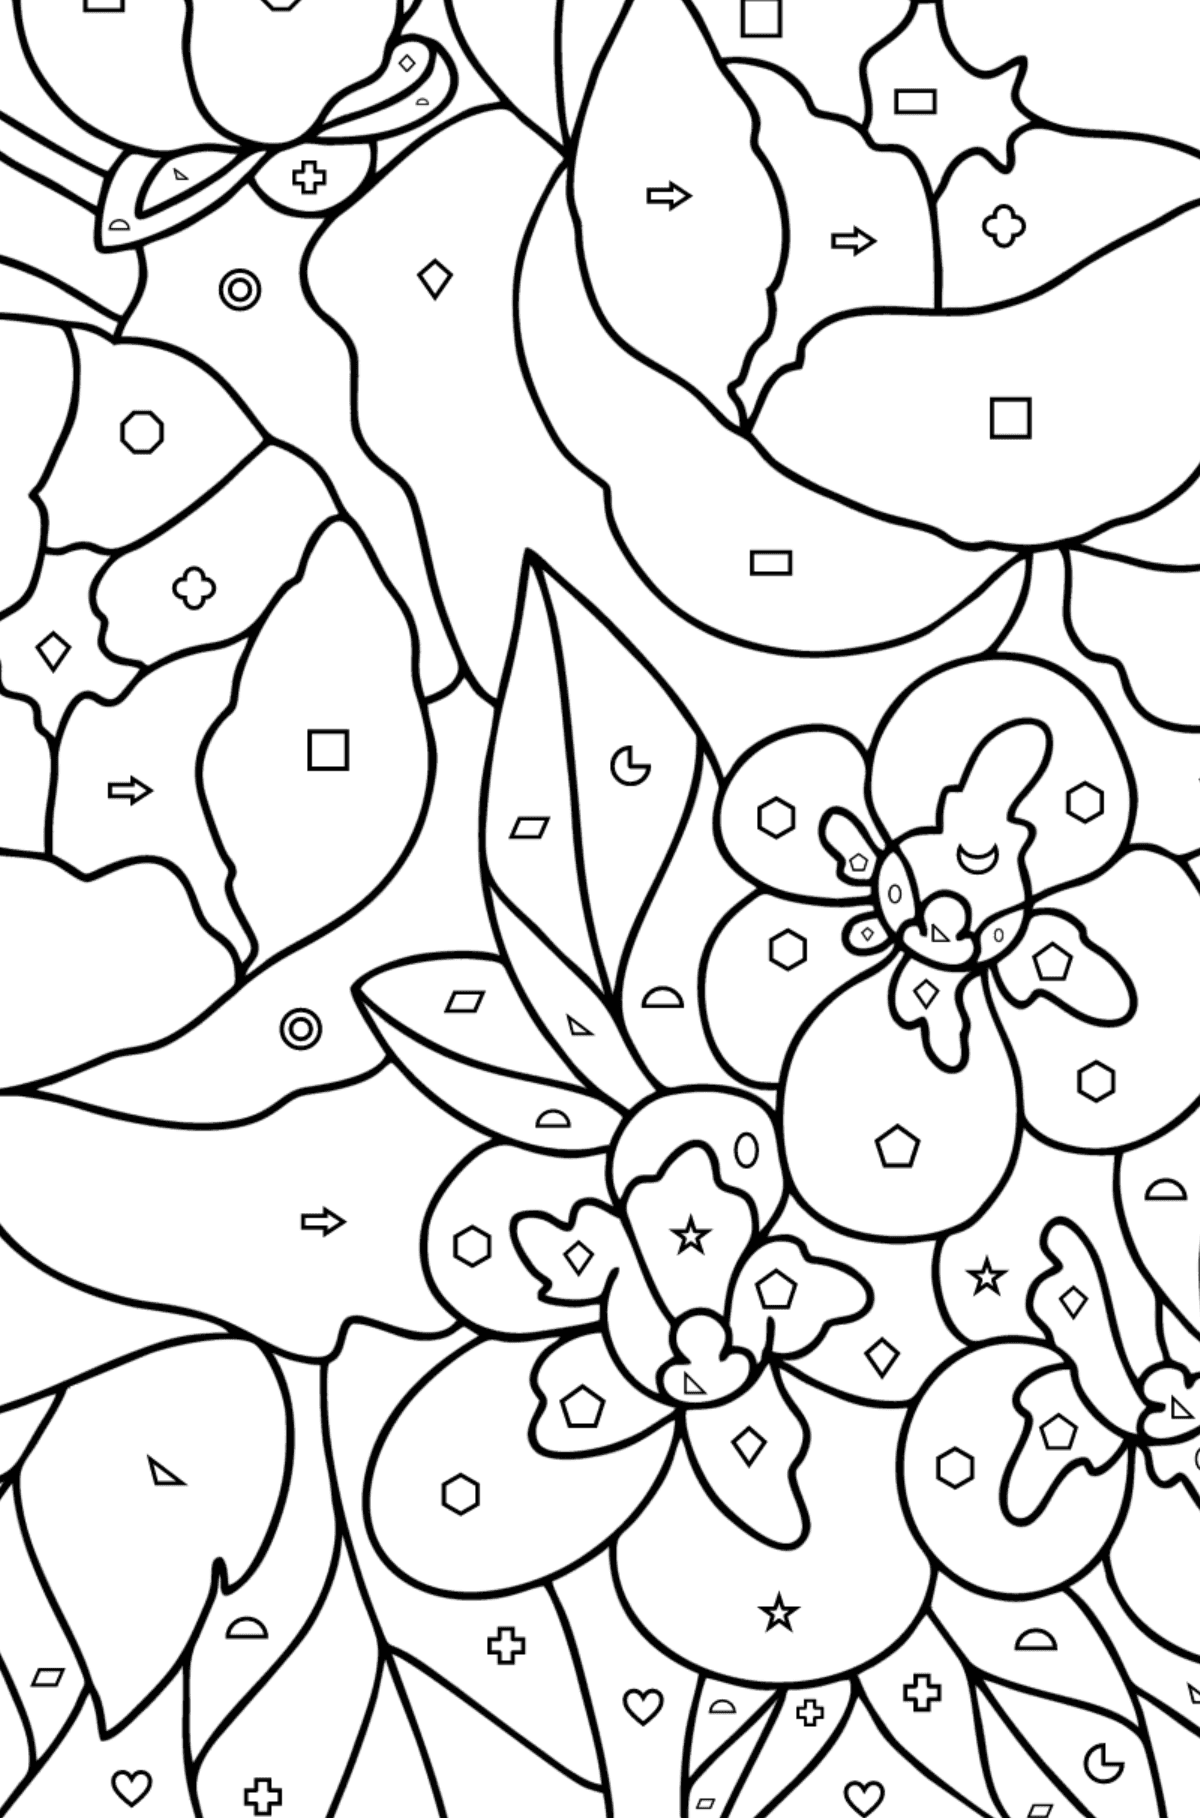 Rose and primrose in a basket - Flowers Coloring Pages for Adults